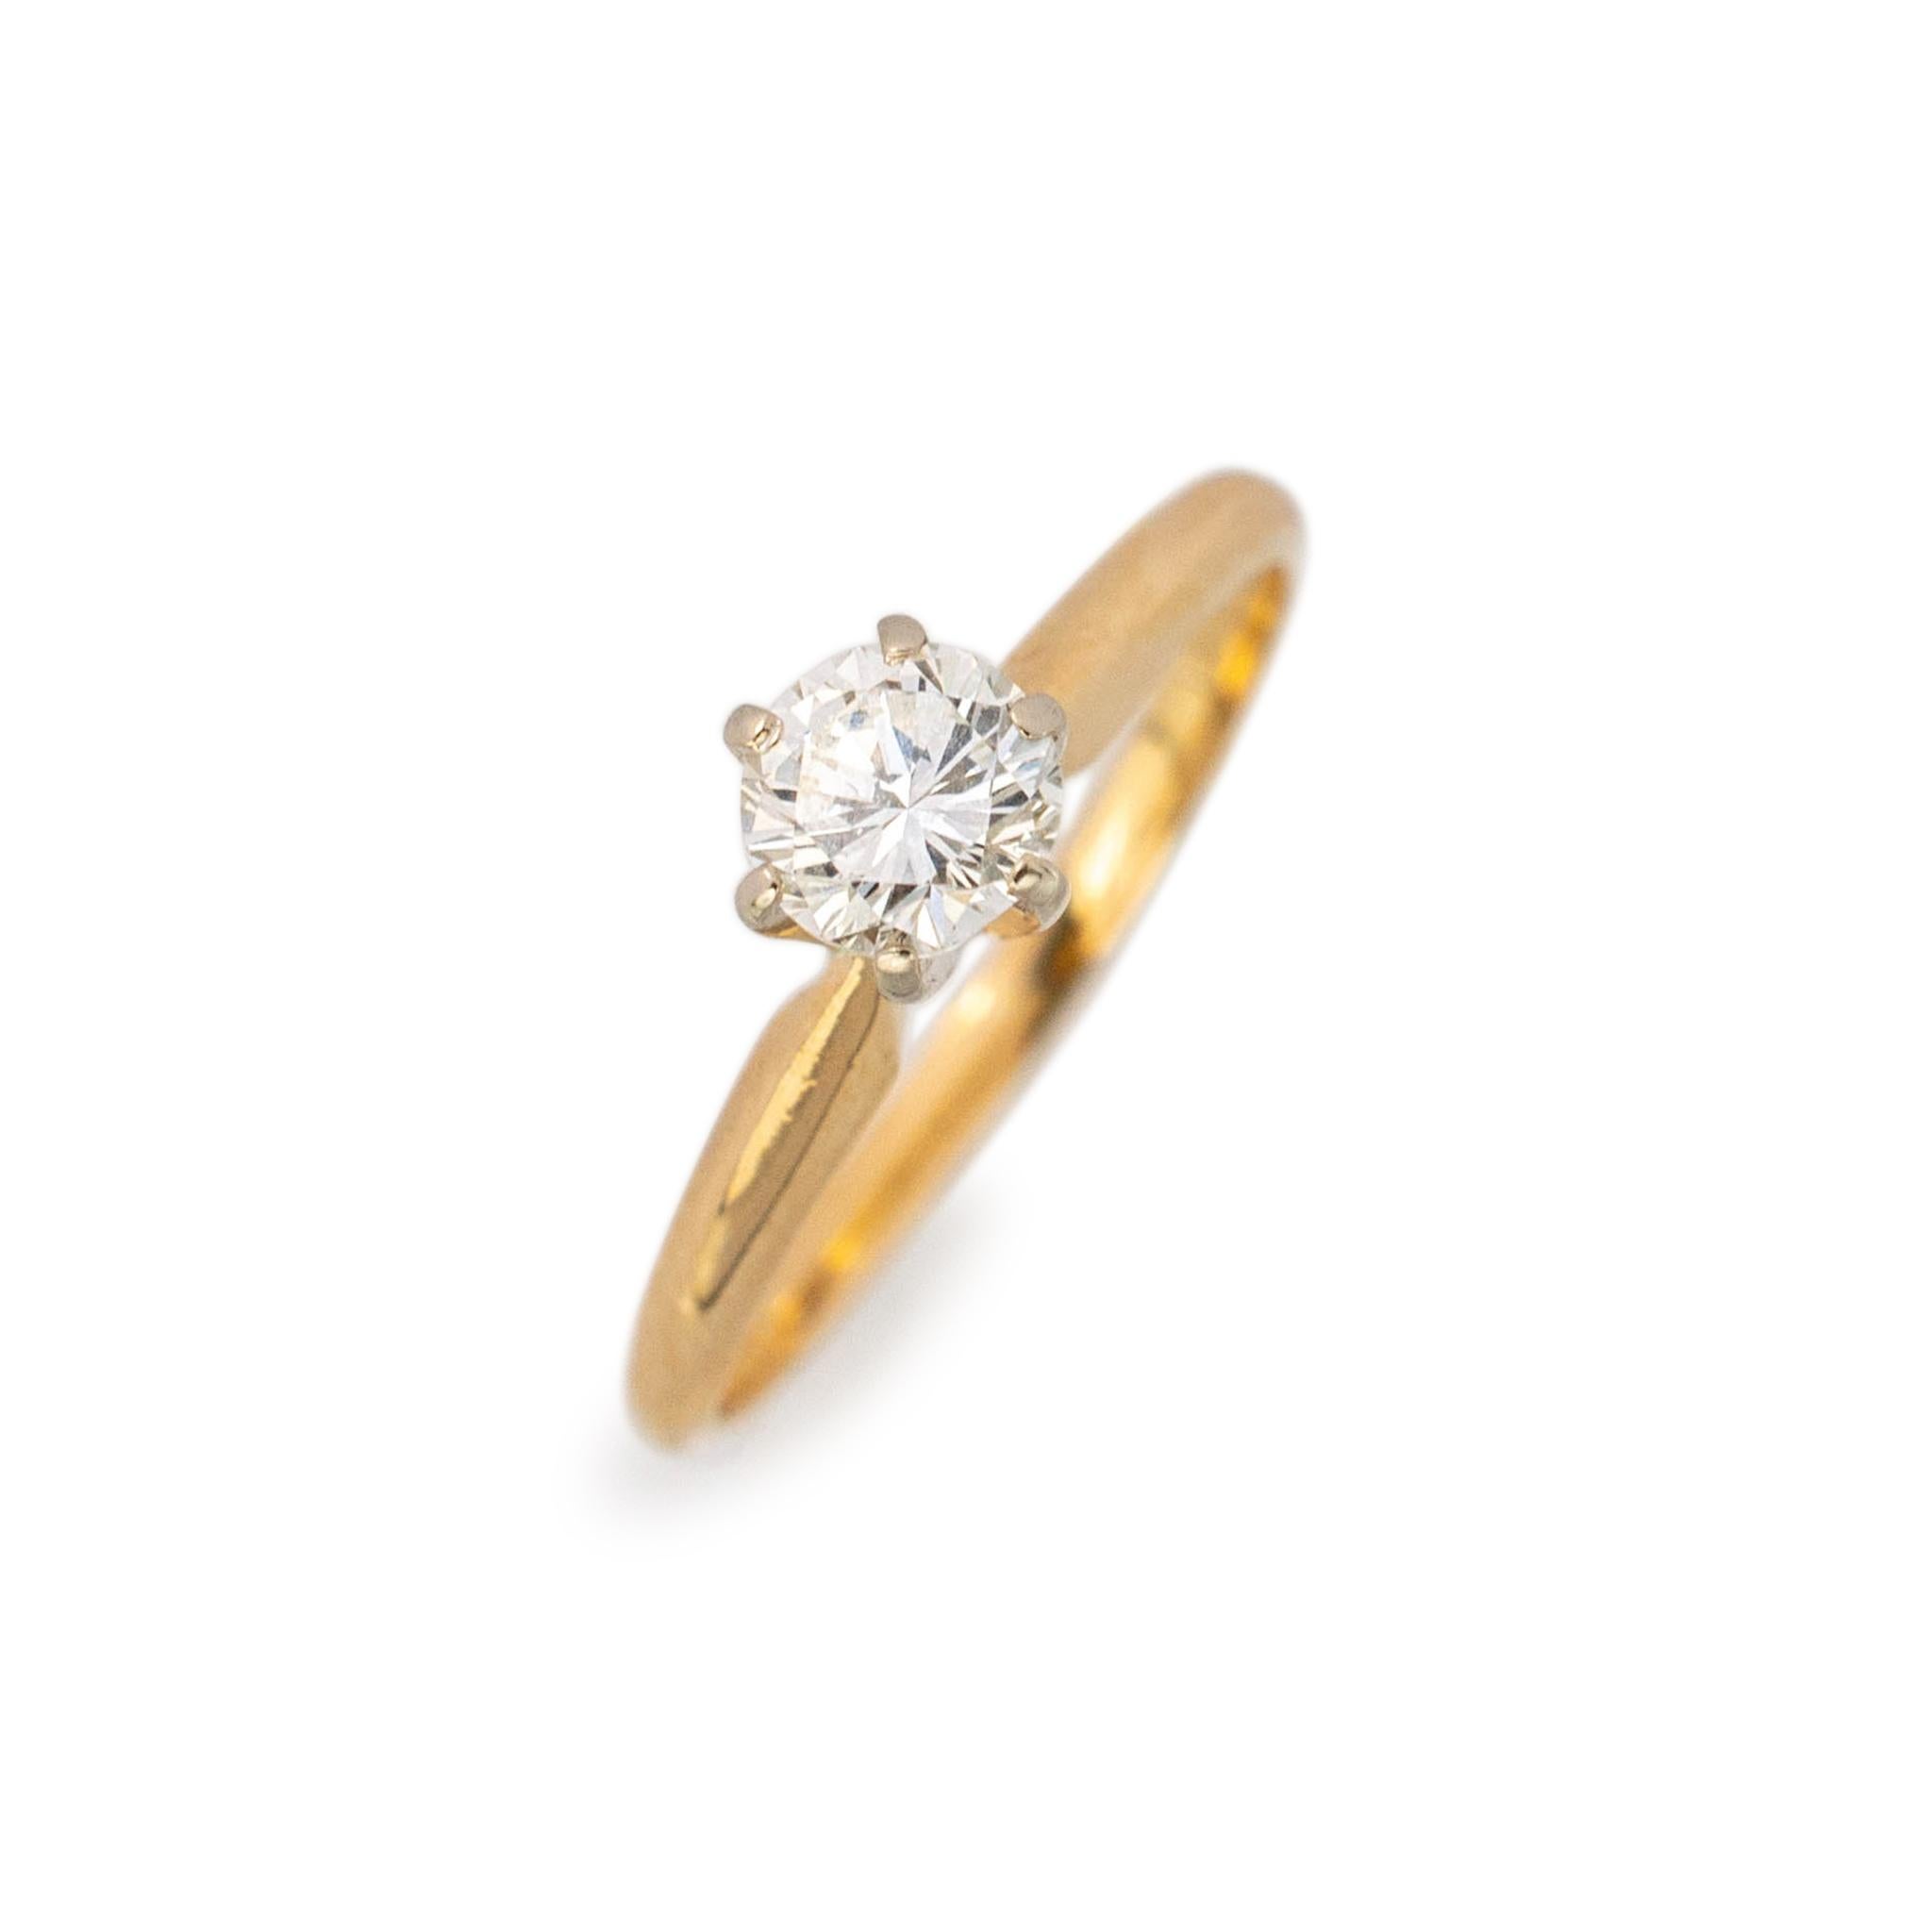 Gender: Ladies

Metal Type: 14K Yellow Gold

Size: 7

Shank Width: 2.25mm

Weight: 2.00grams

Ladies 14K yellow gold diamond solitaire engagement ring with a half round shank.
Engraved with 